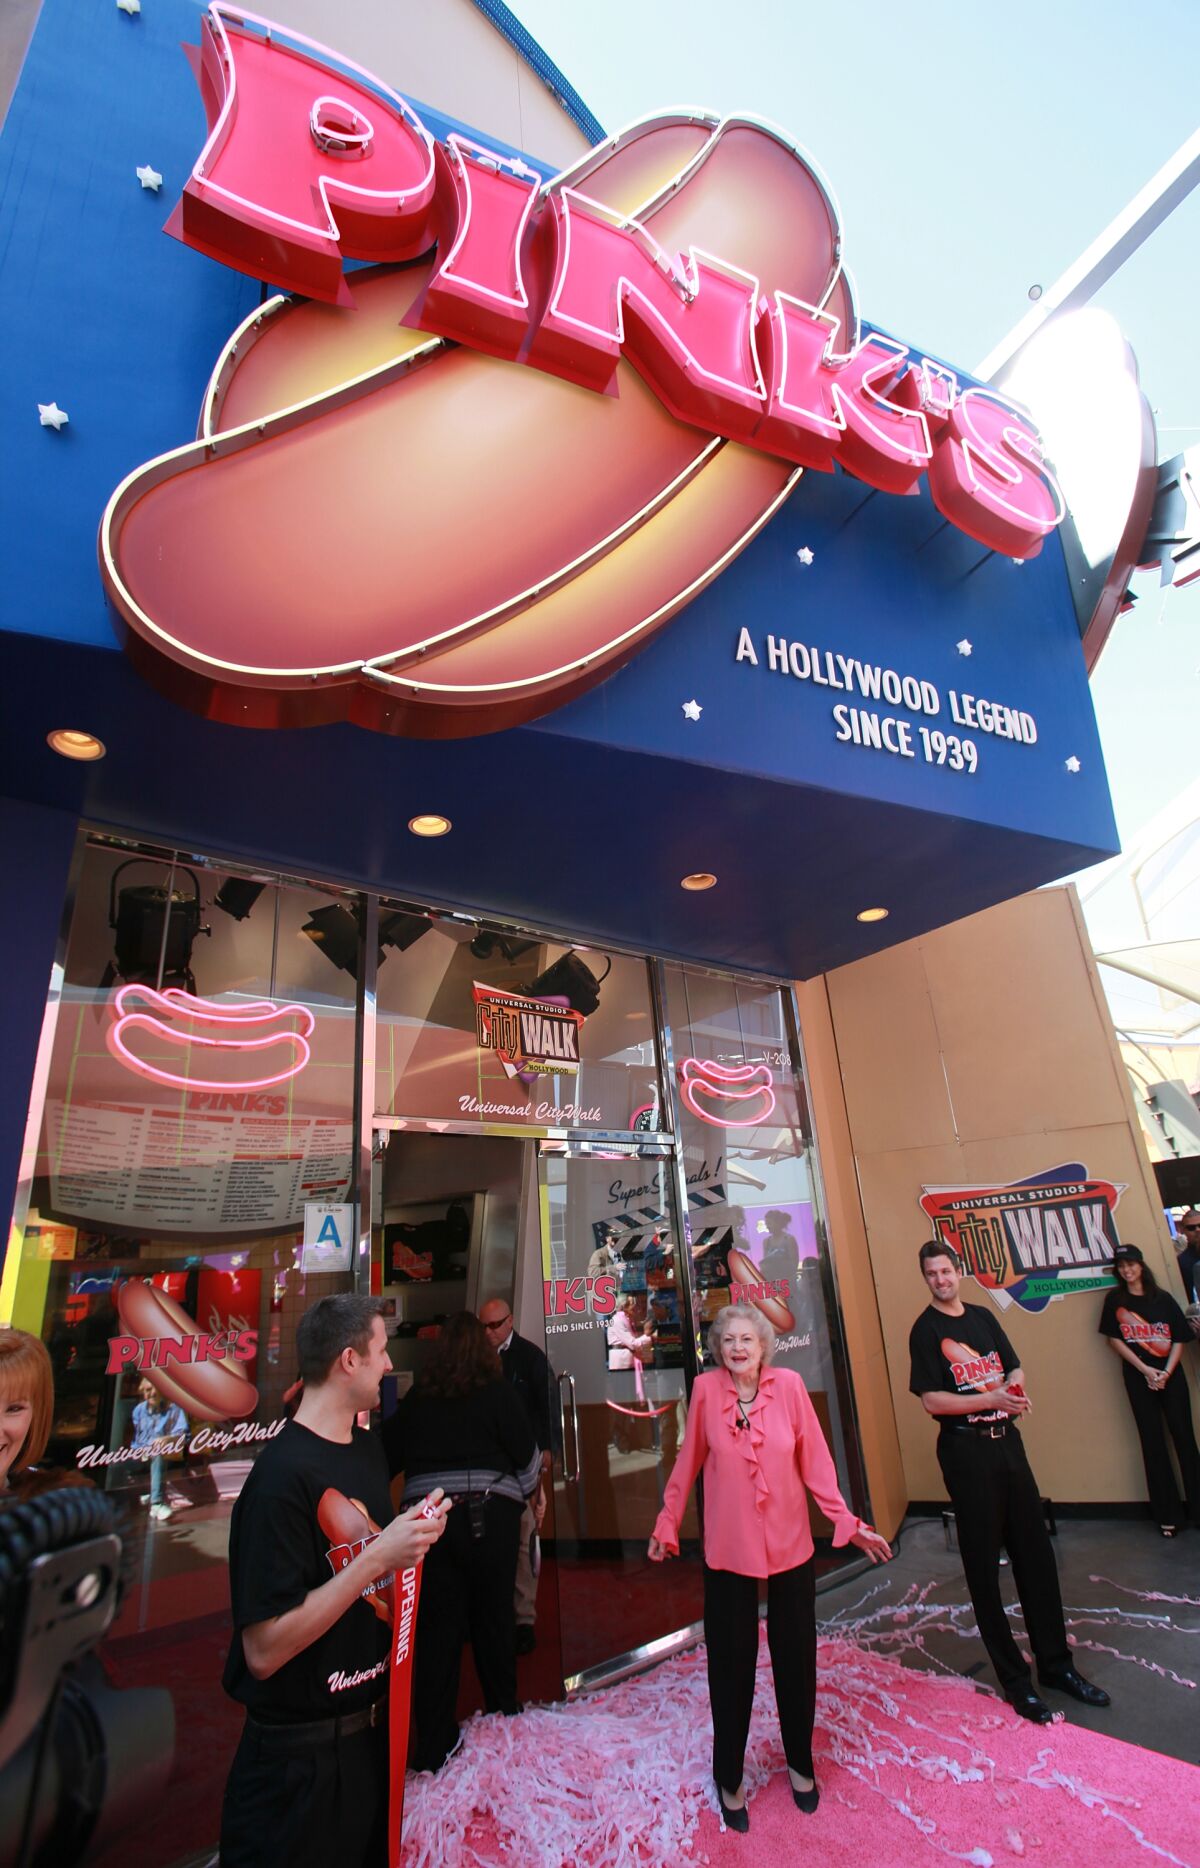 A woman in pink attends the grand opening of a restaurant